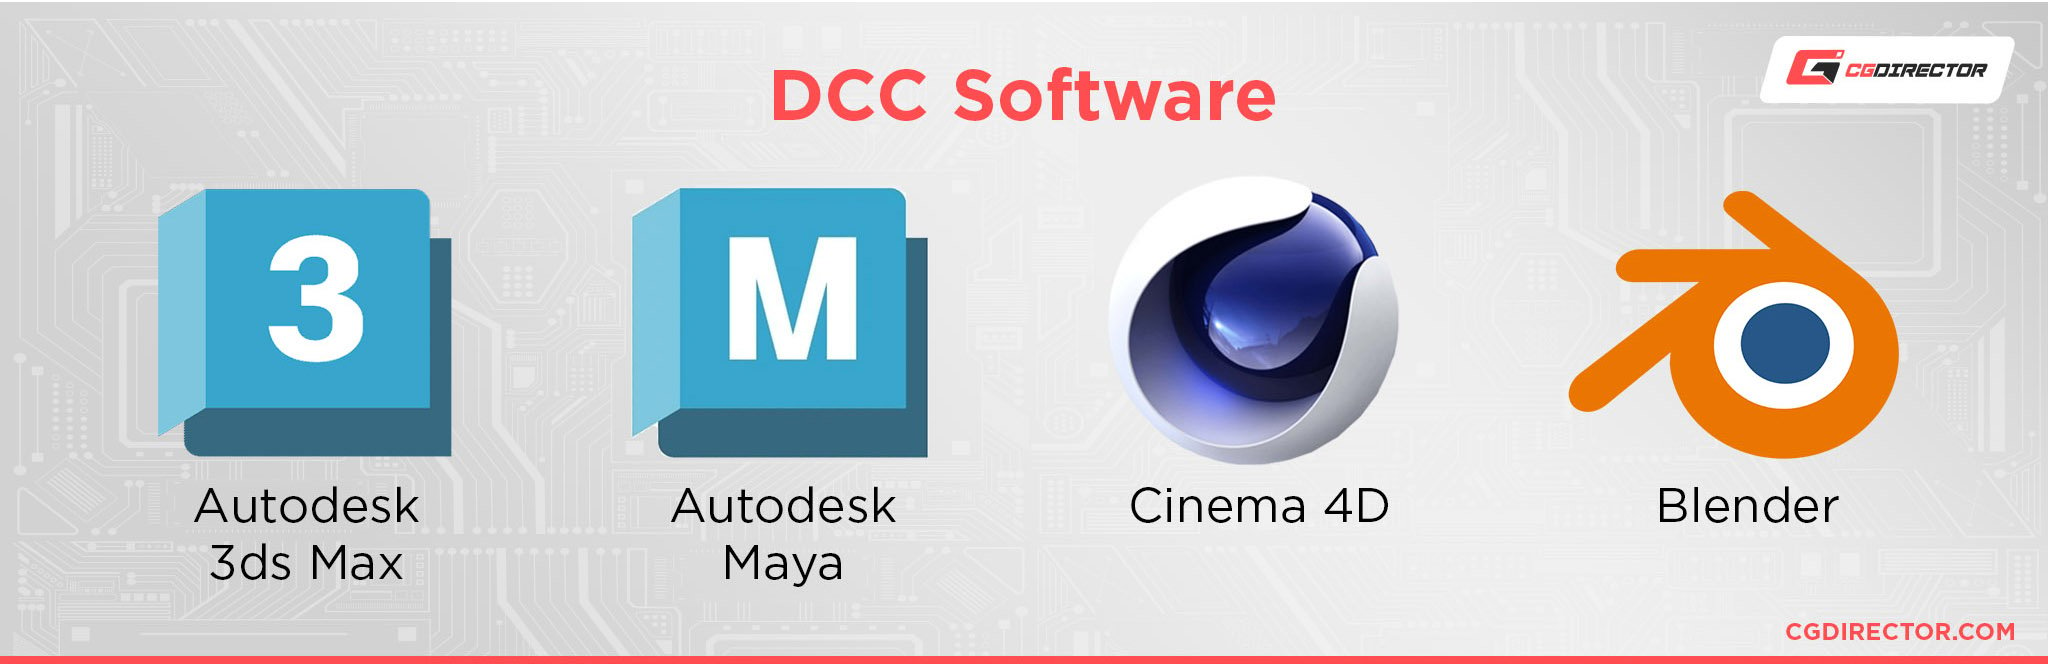 DCC Software